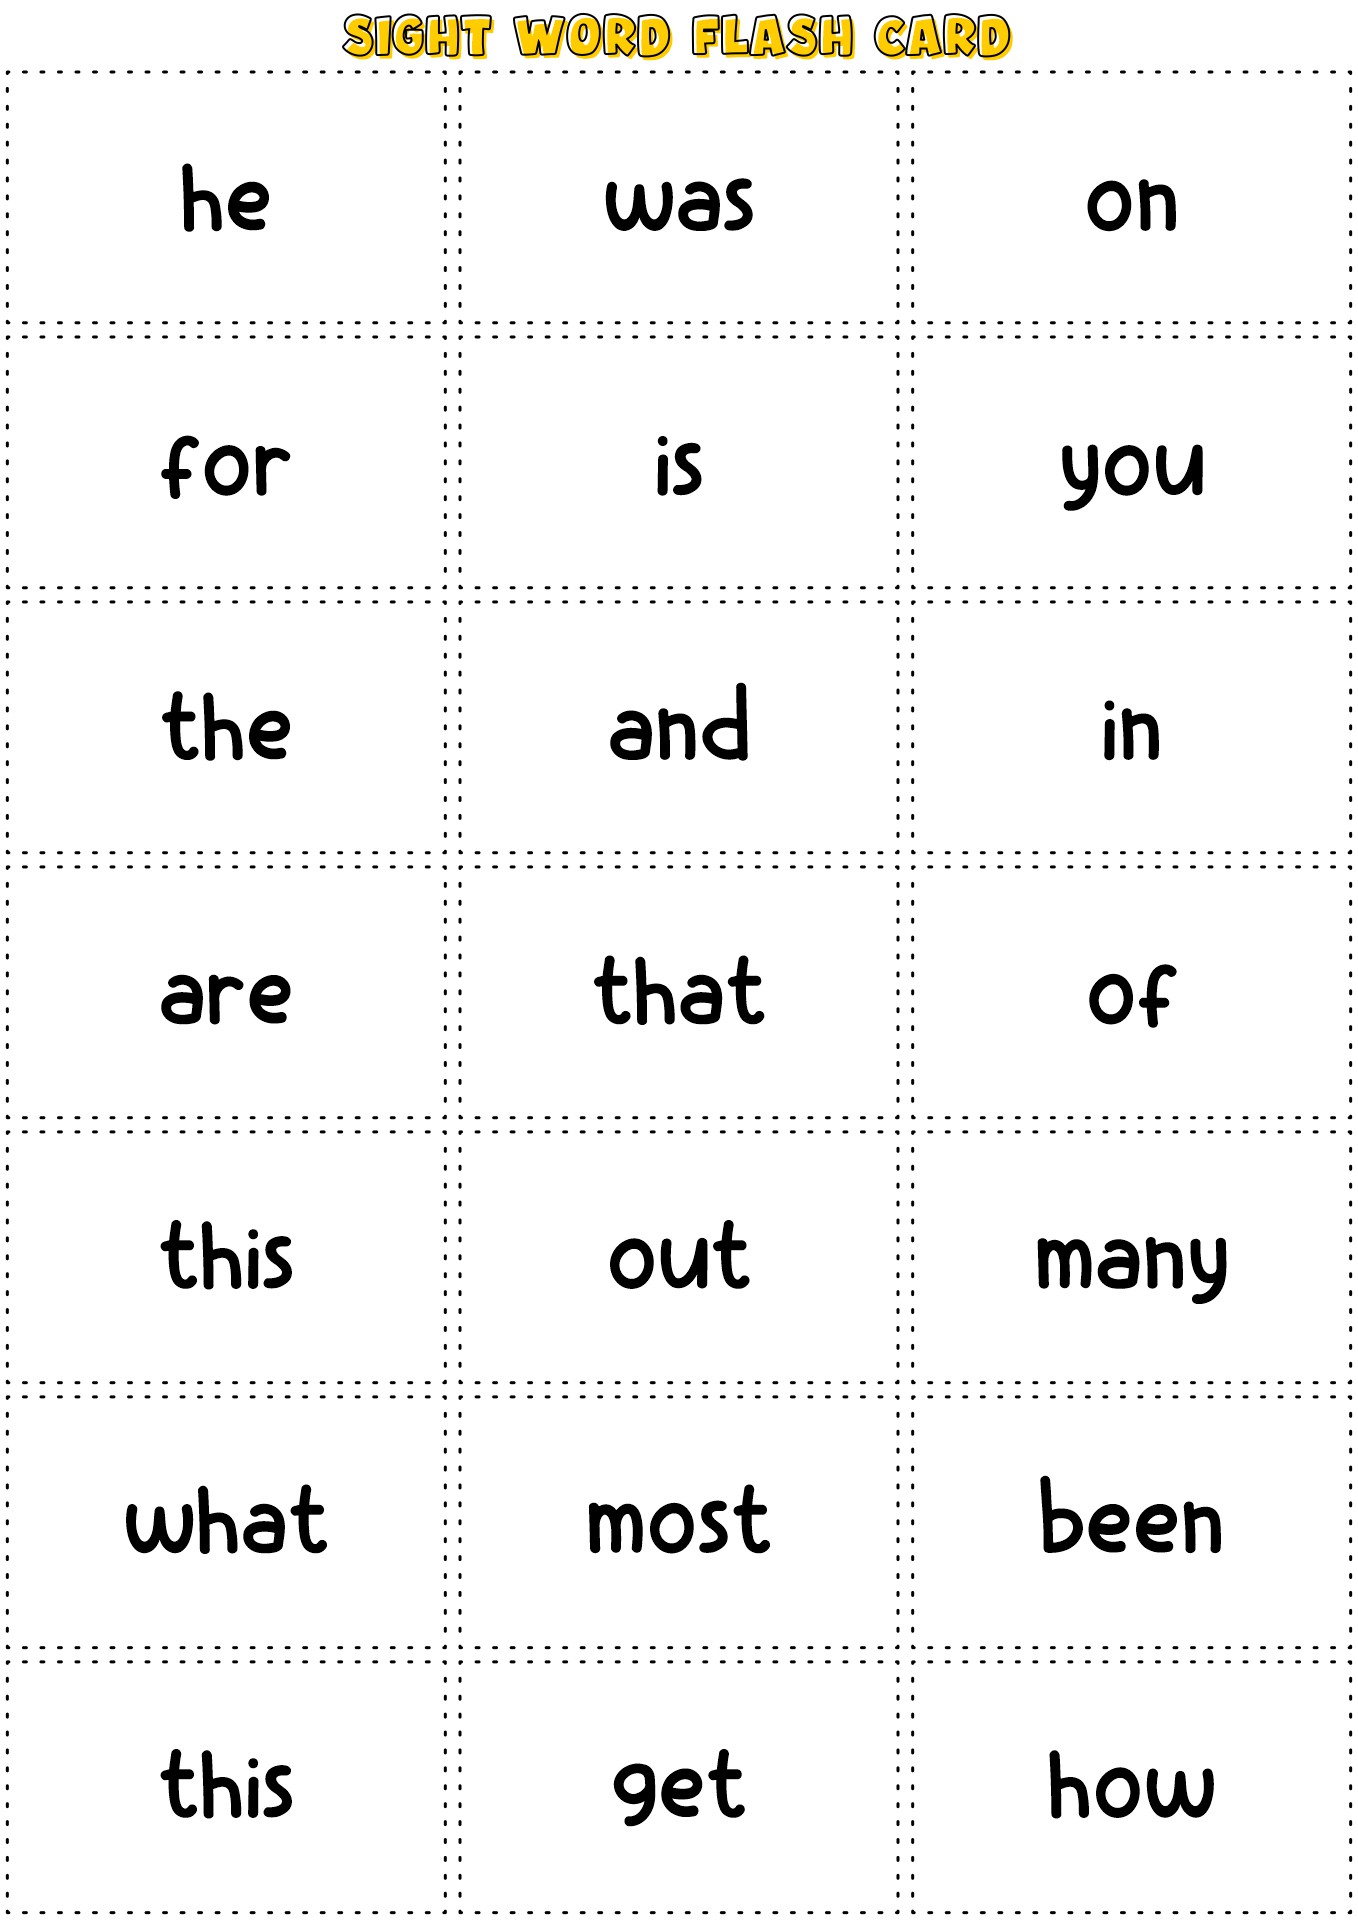 19-best-images-of-fry-s-first-100-words-worksheets-100-fry-sight-word